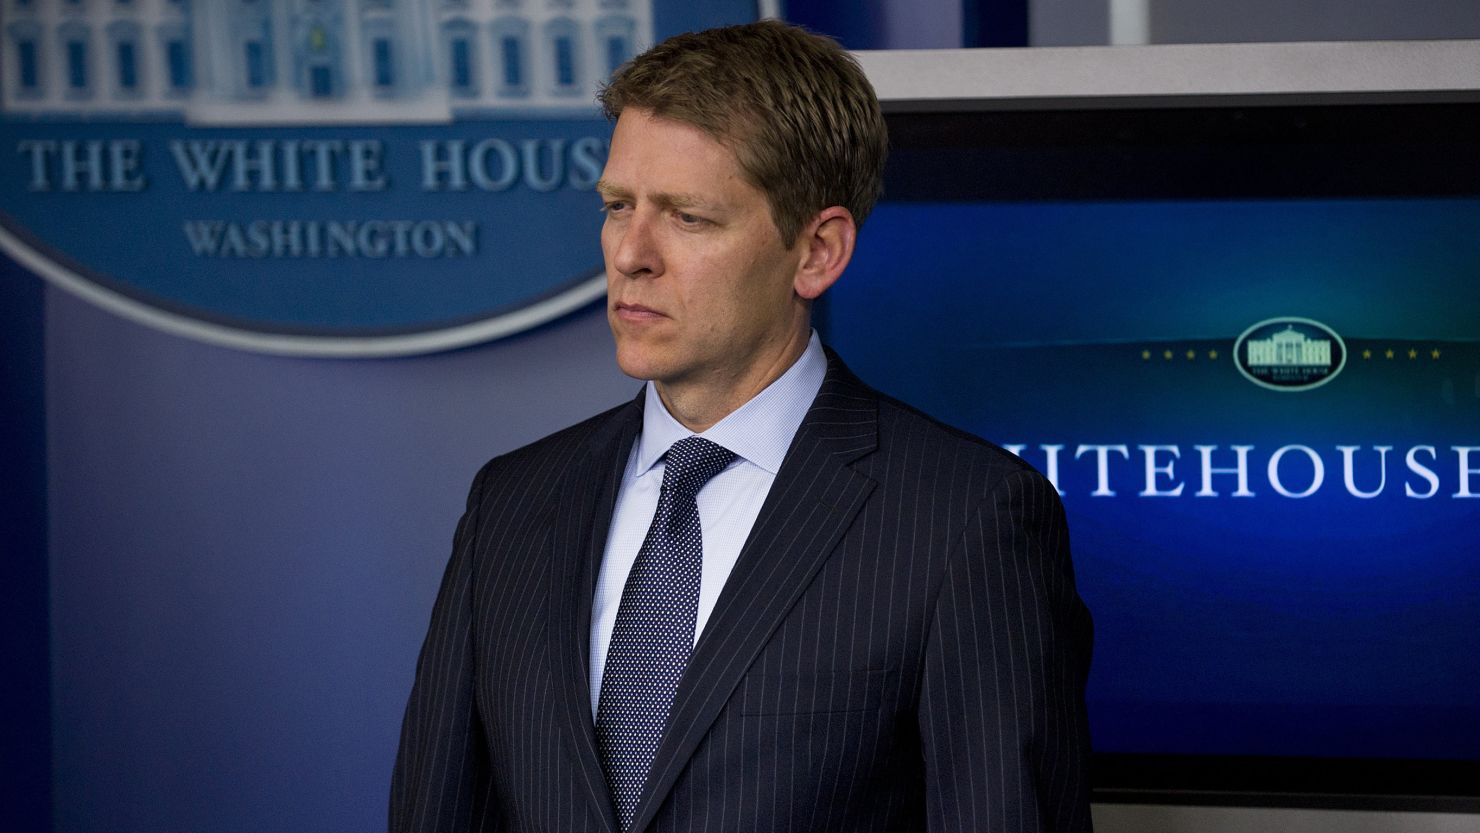 White House Press Secretary Jay Carney said President Obama has confidence in his Secret Service  director.